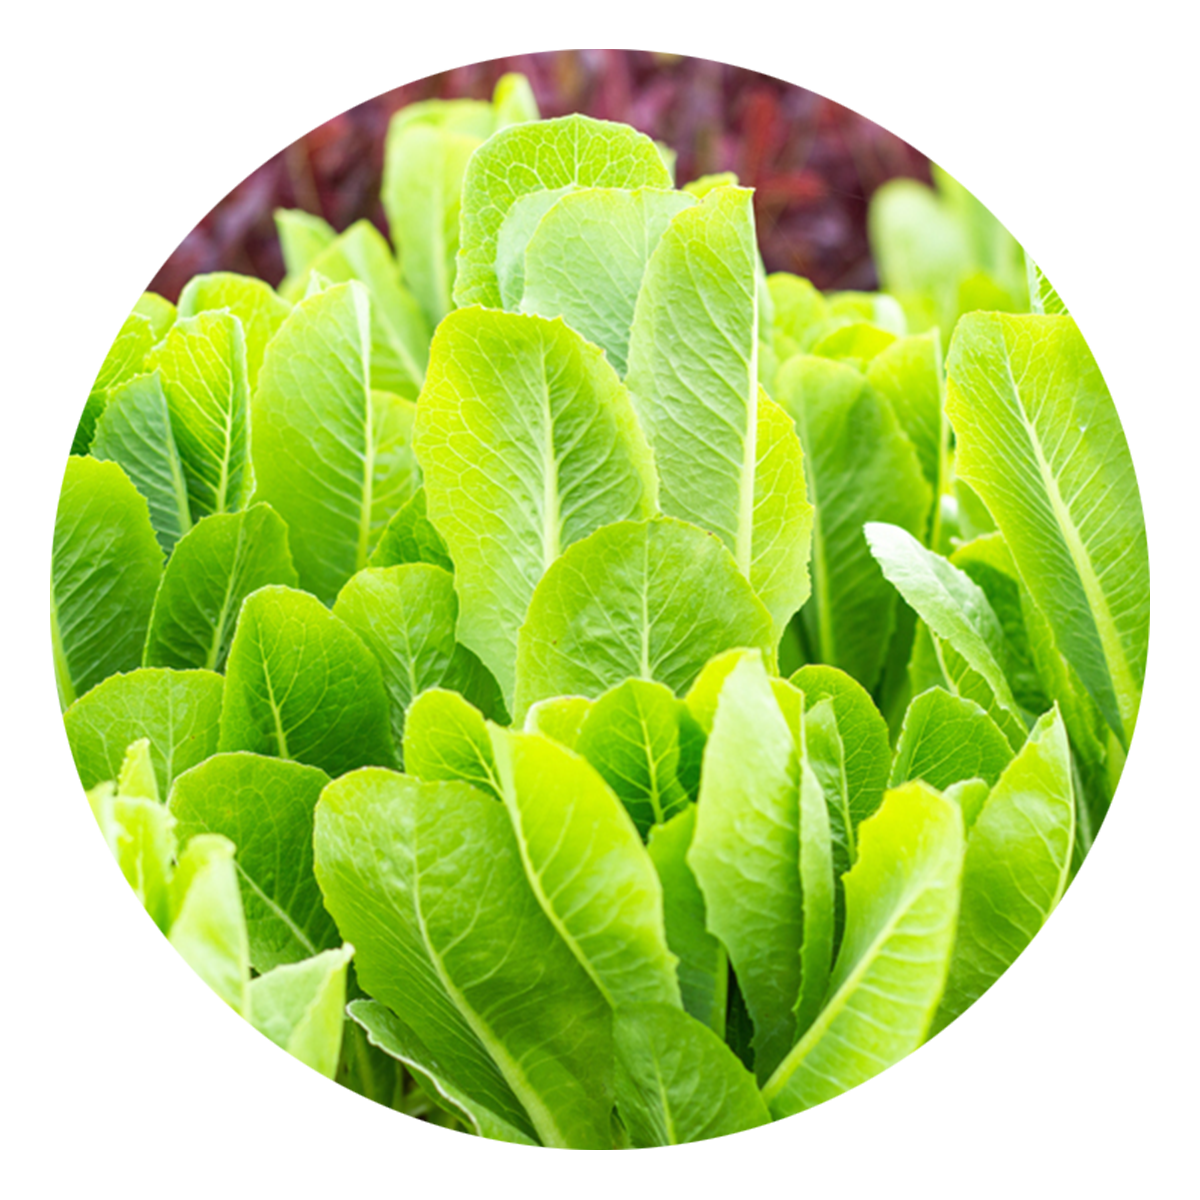 Lettuce, Leaf by Seed